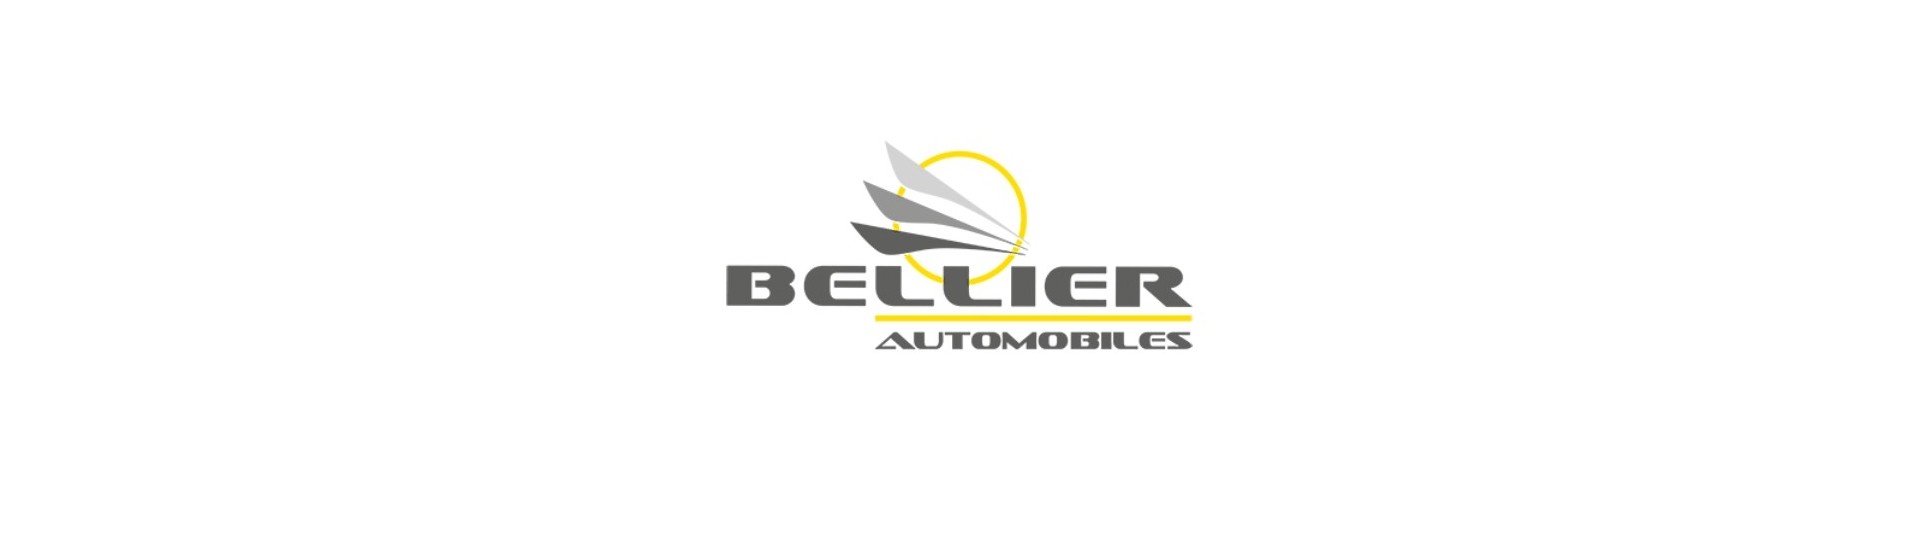 Tank core at the best car price without a permit Bellier